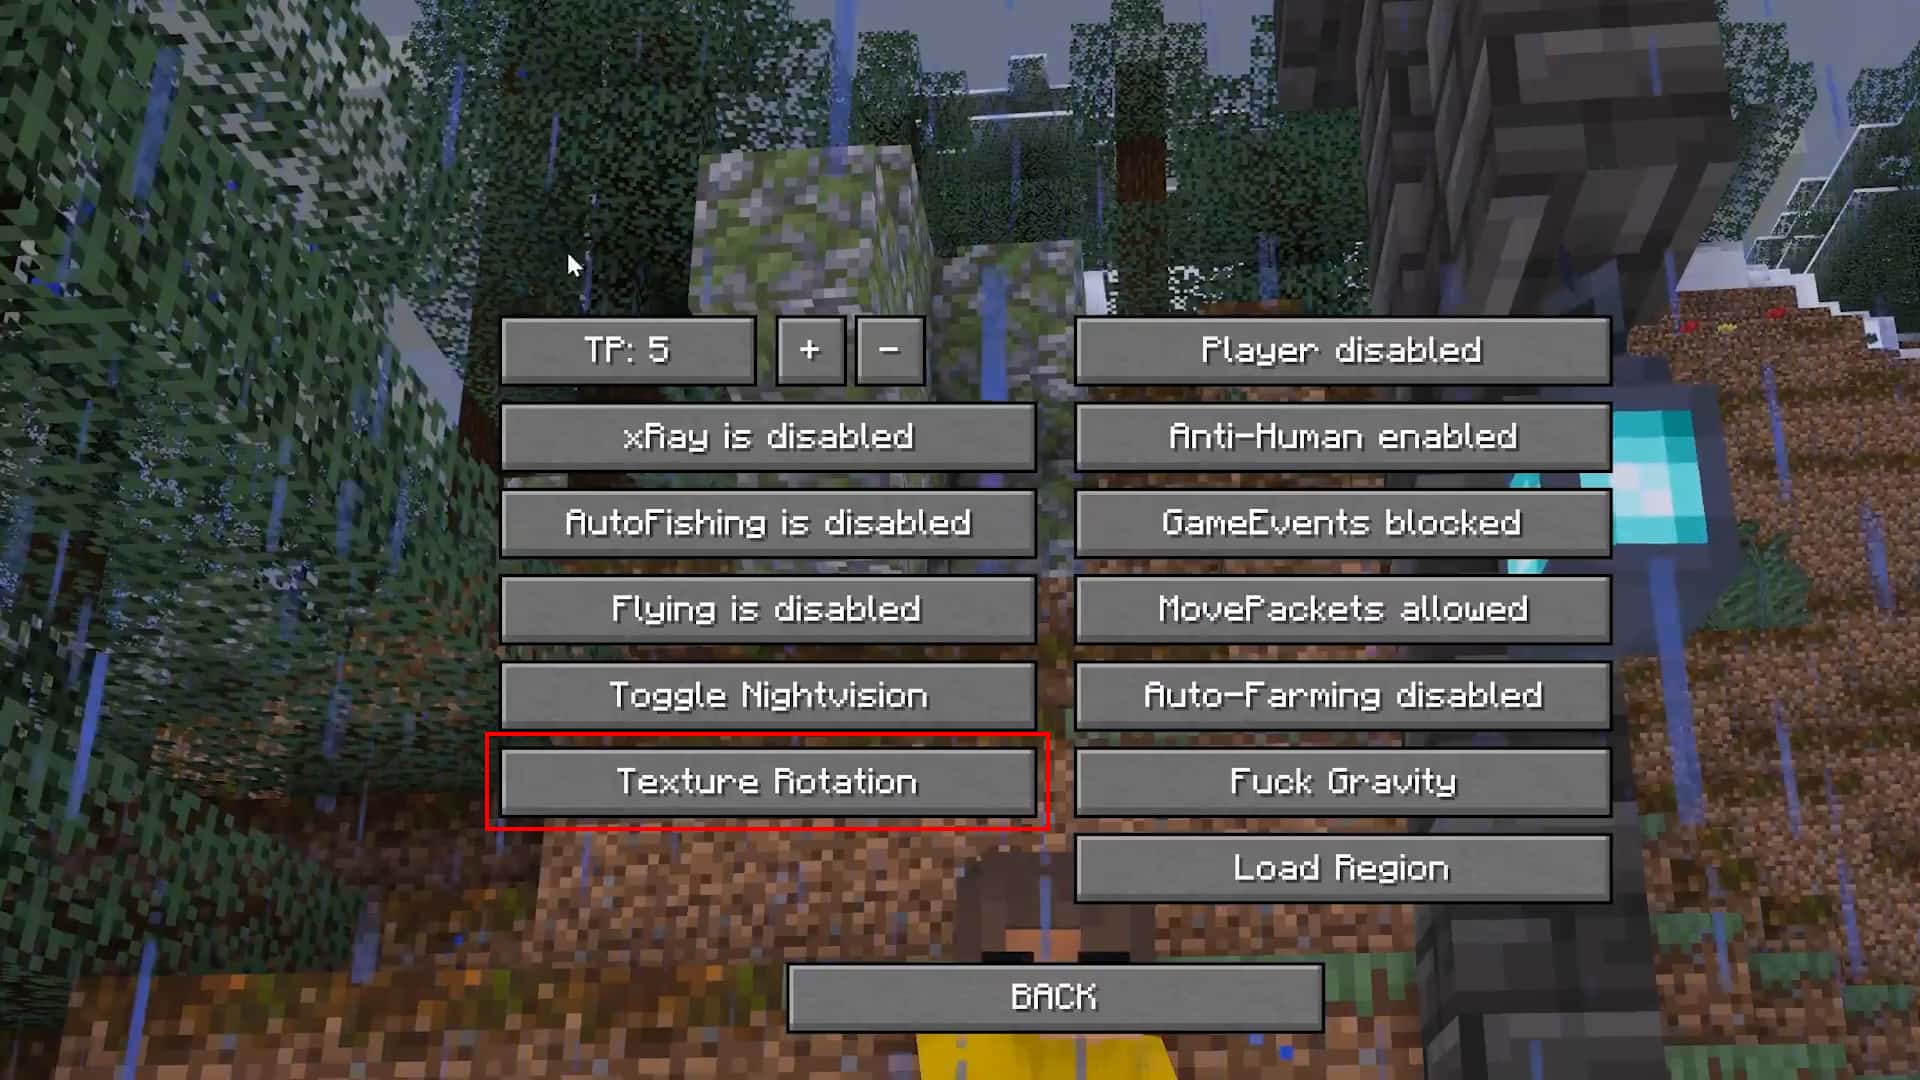 Screenshot from the video showing a button labled "Texture Rotation" in LiveOverflow's client